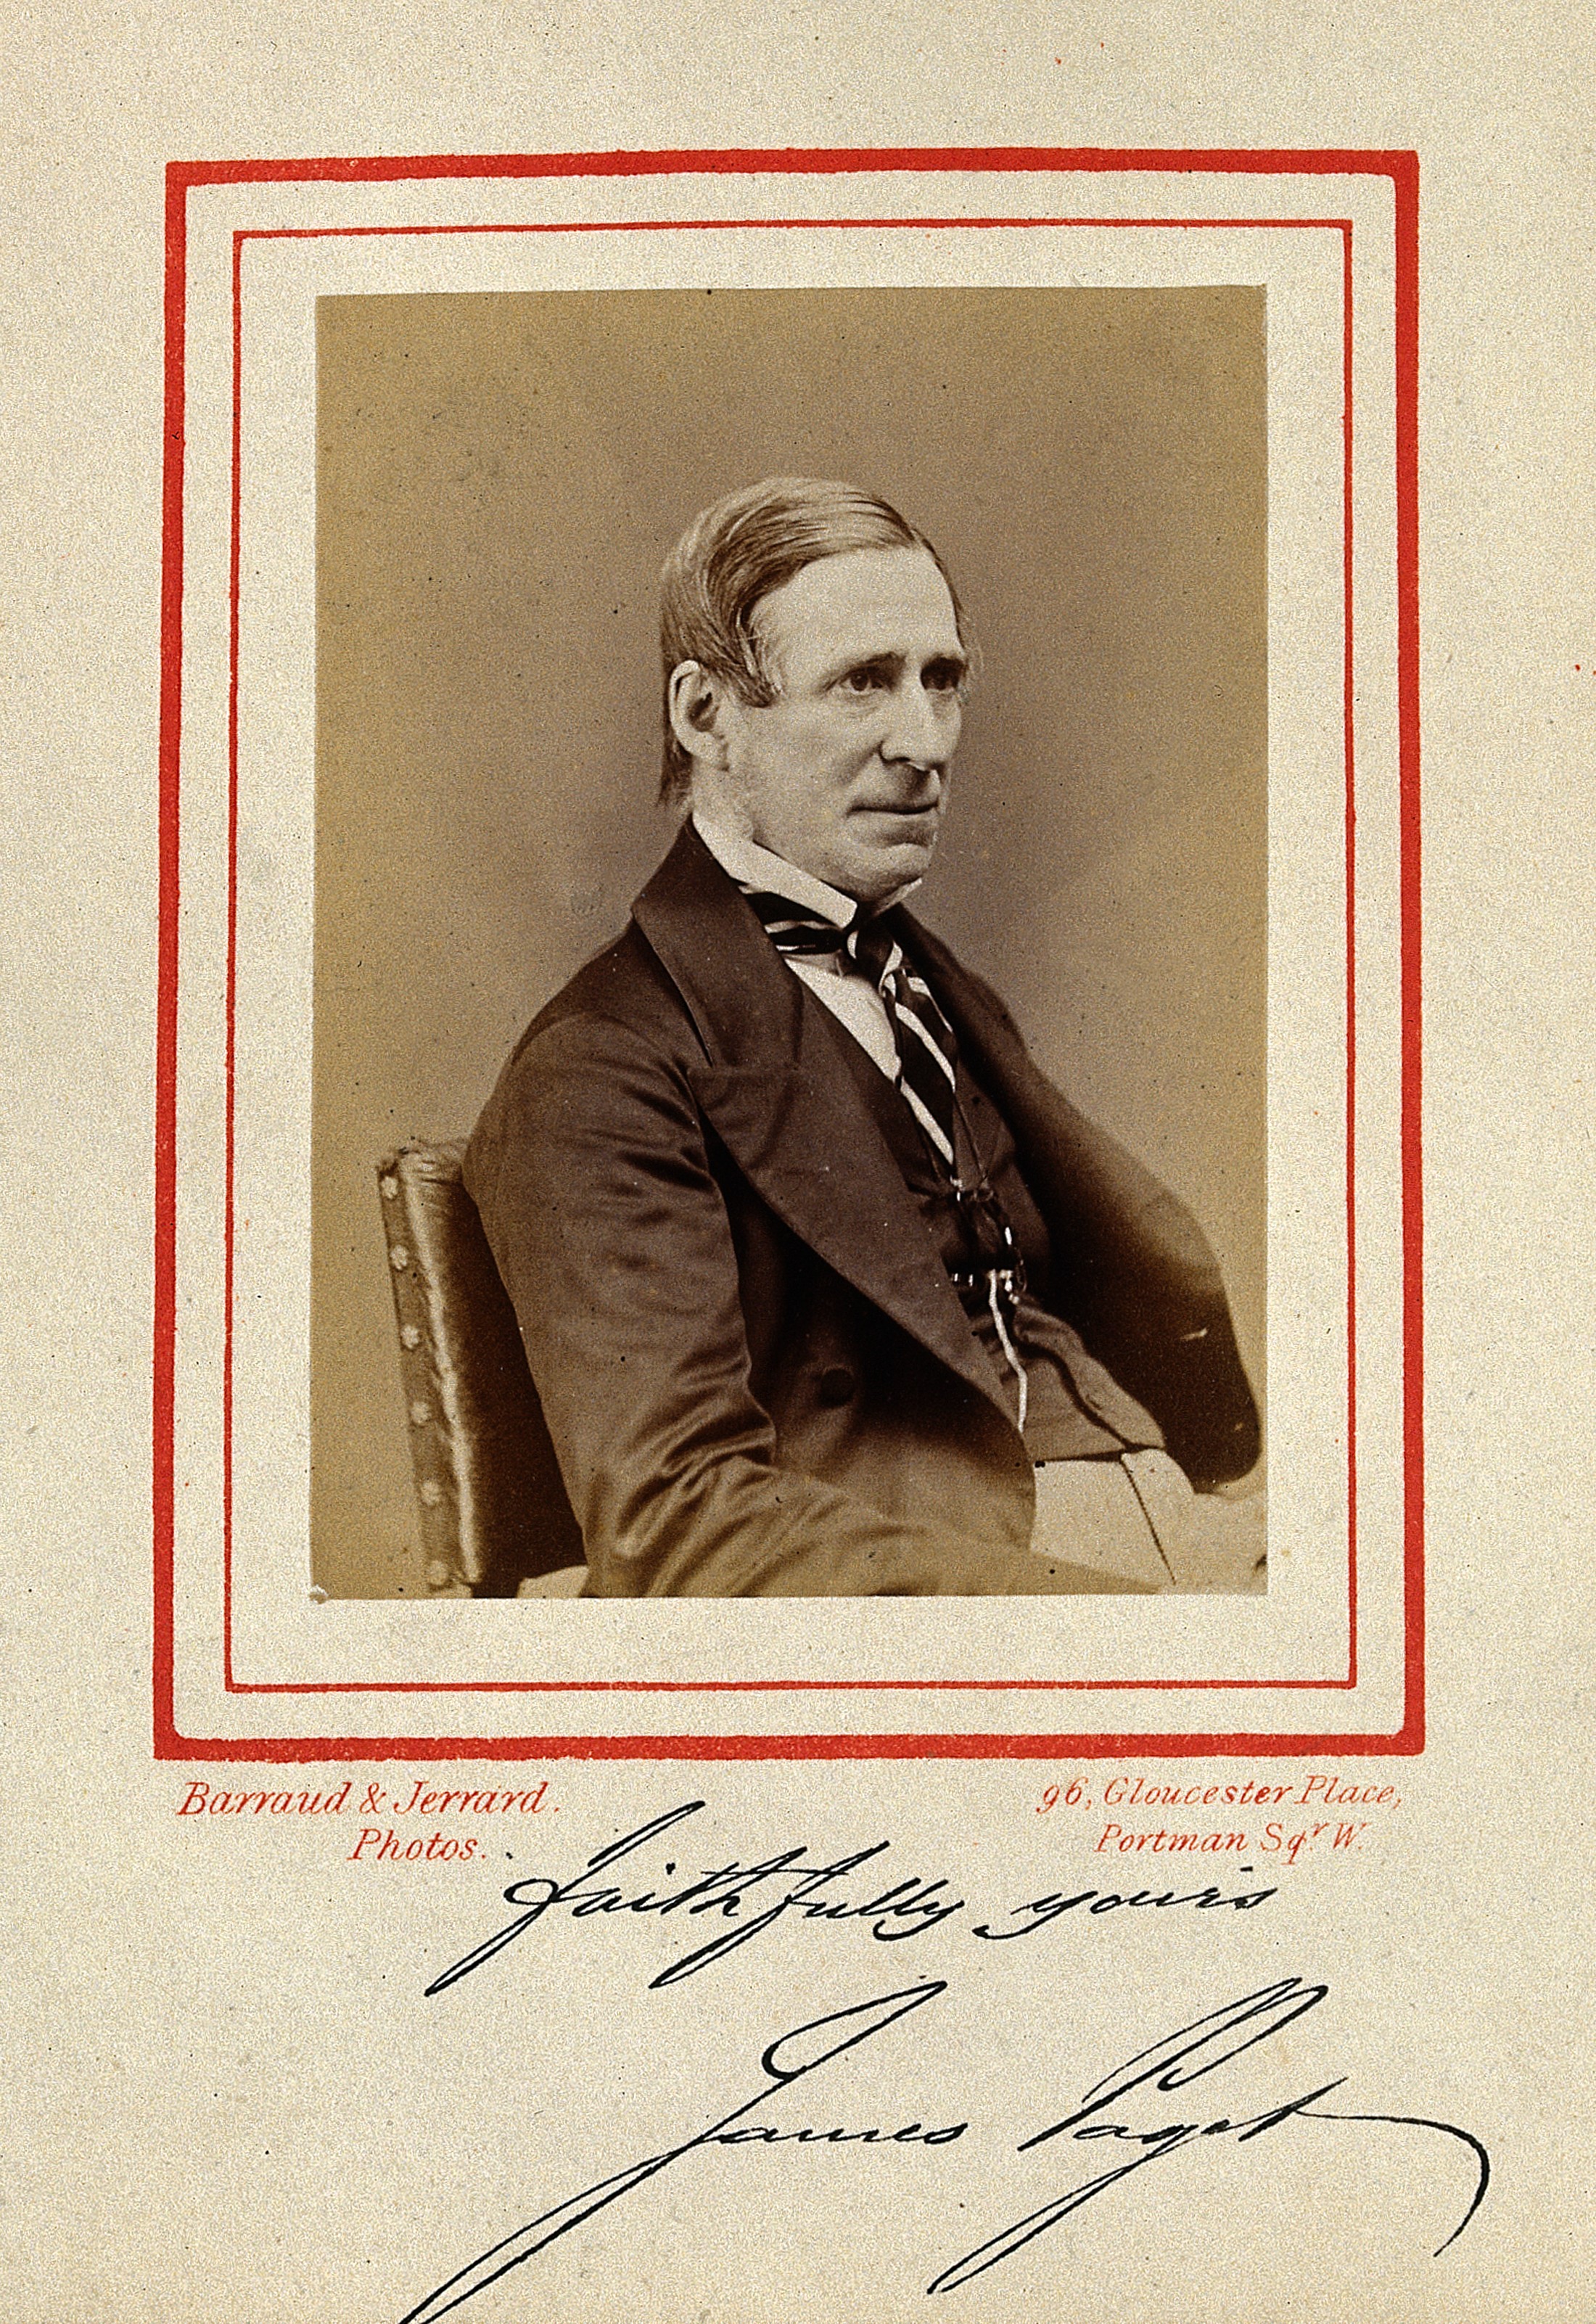 Sir James Paget. Photograph by Barraud & Jerrard, 1873. Wellcome V0028390